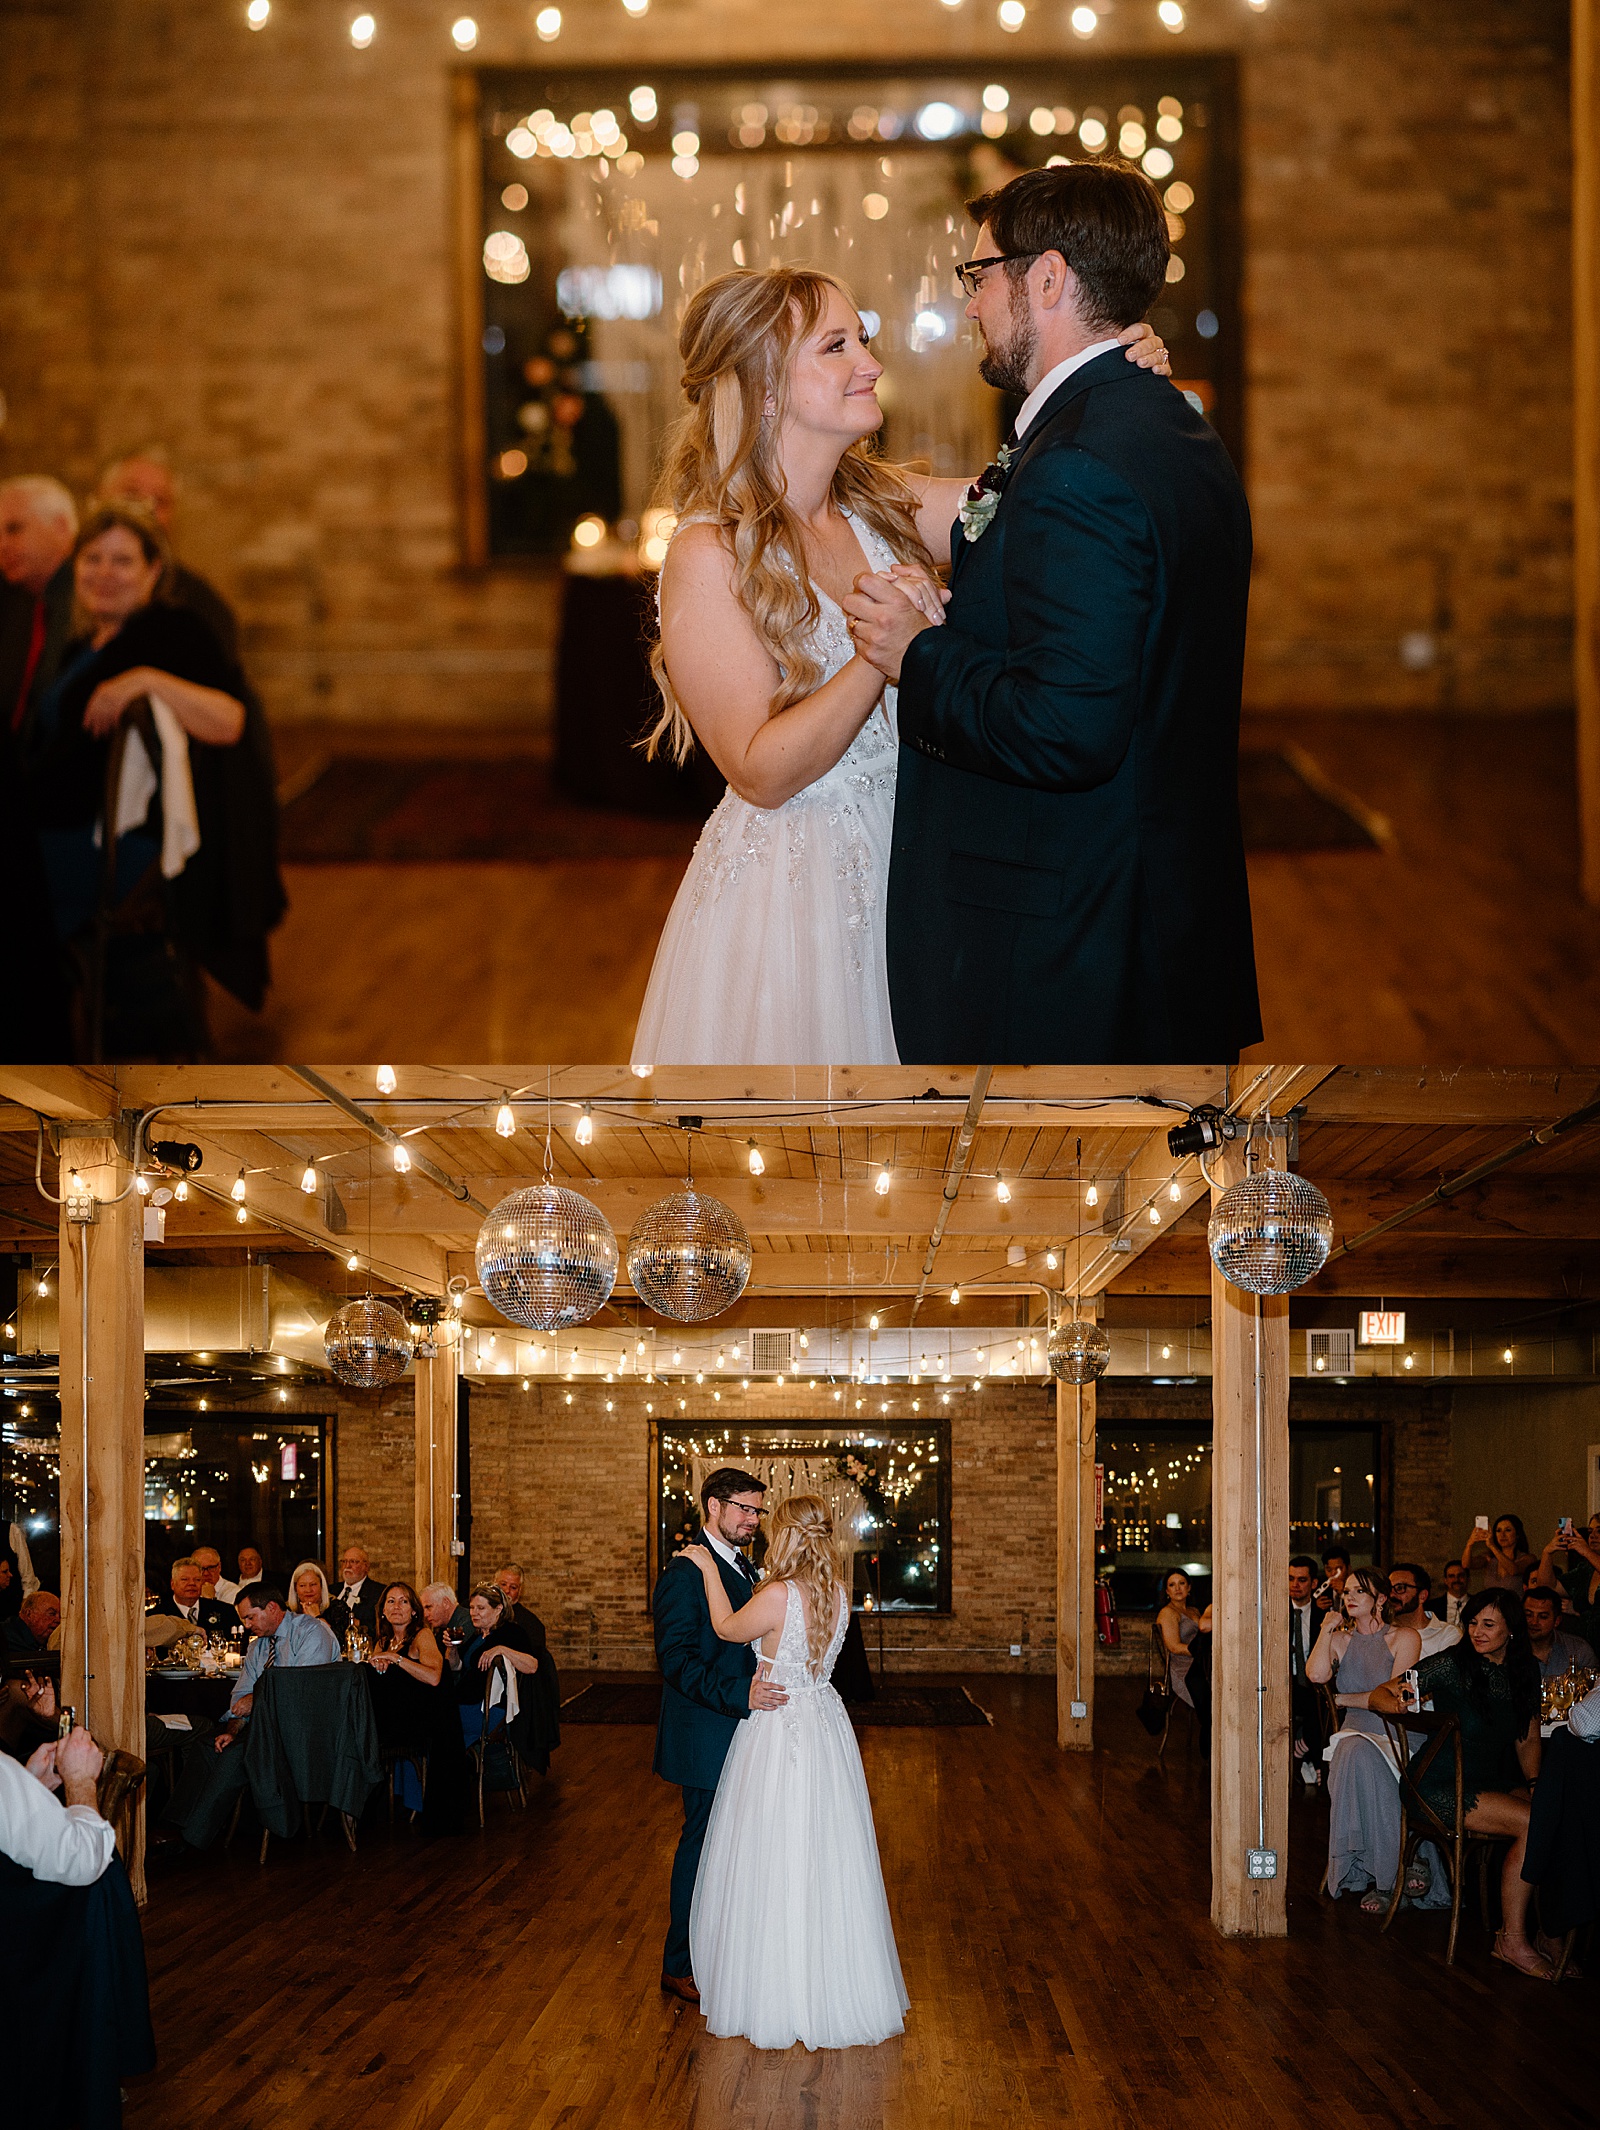 Newlyweds share their first dance under disco balls by Midwest wedding photographer Indigo Lace